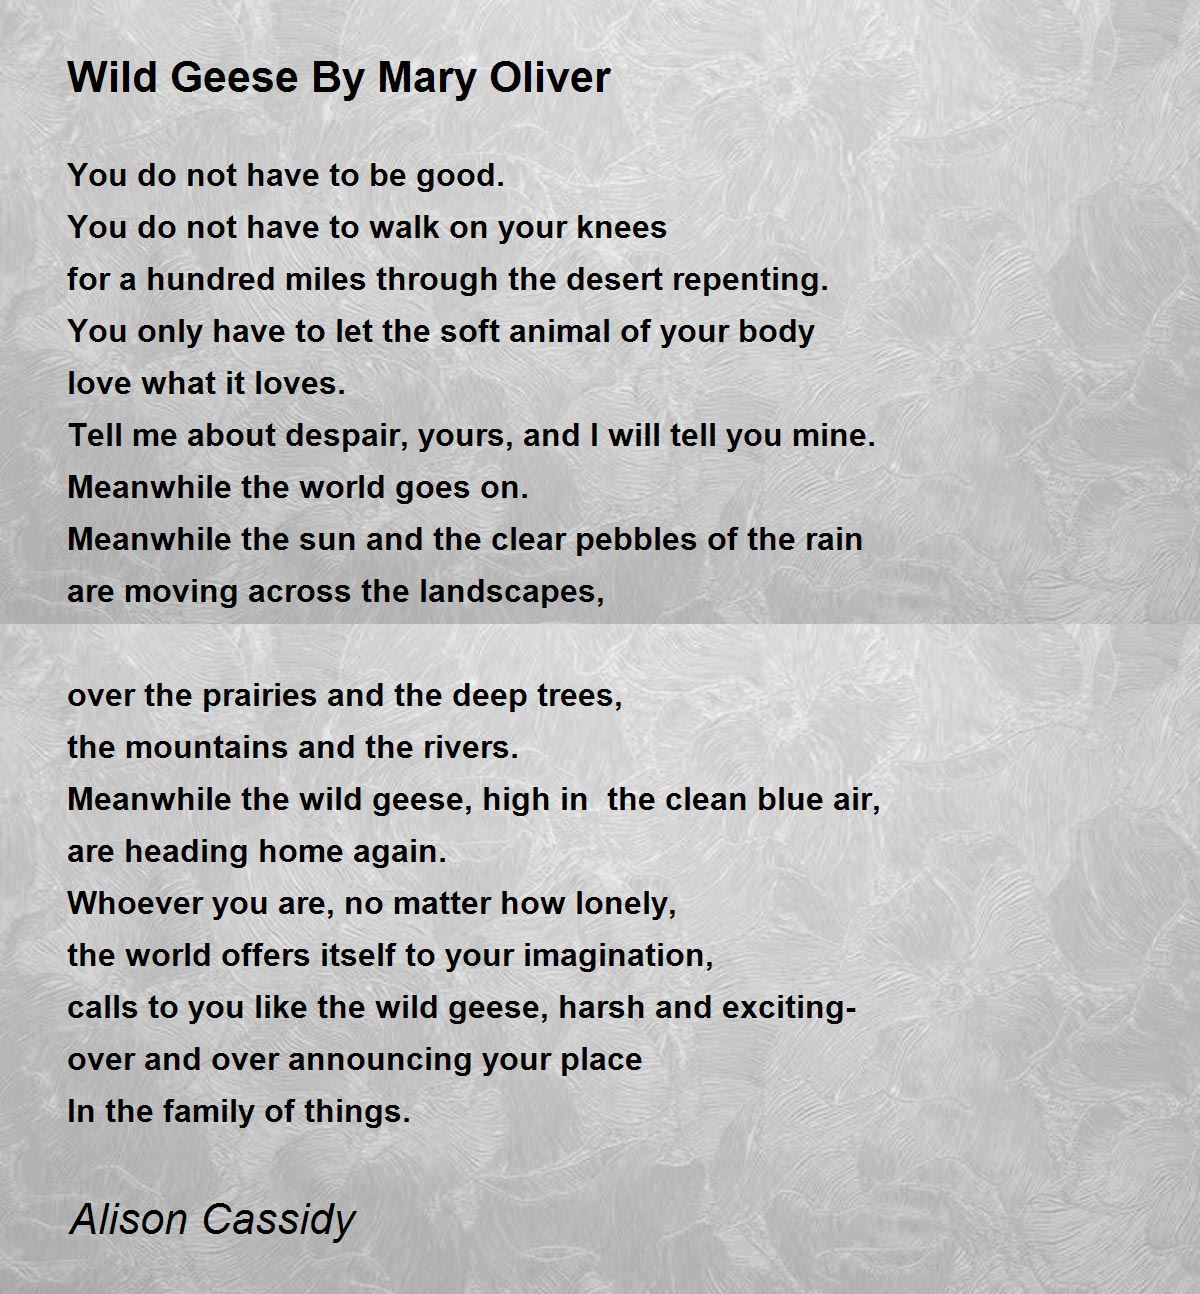 Wild geese mary oliver pdf